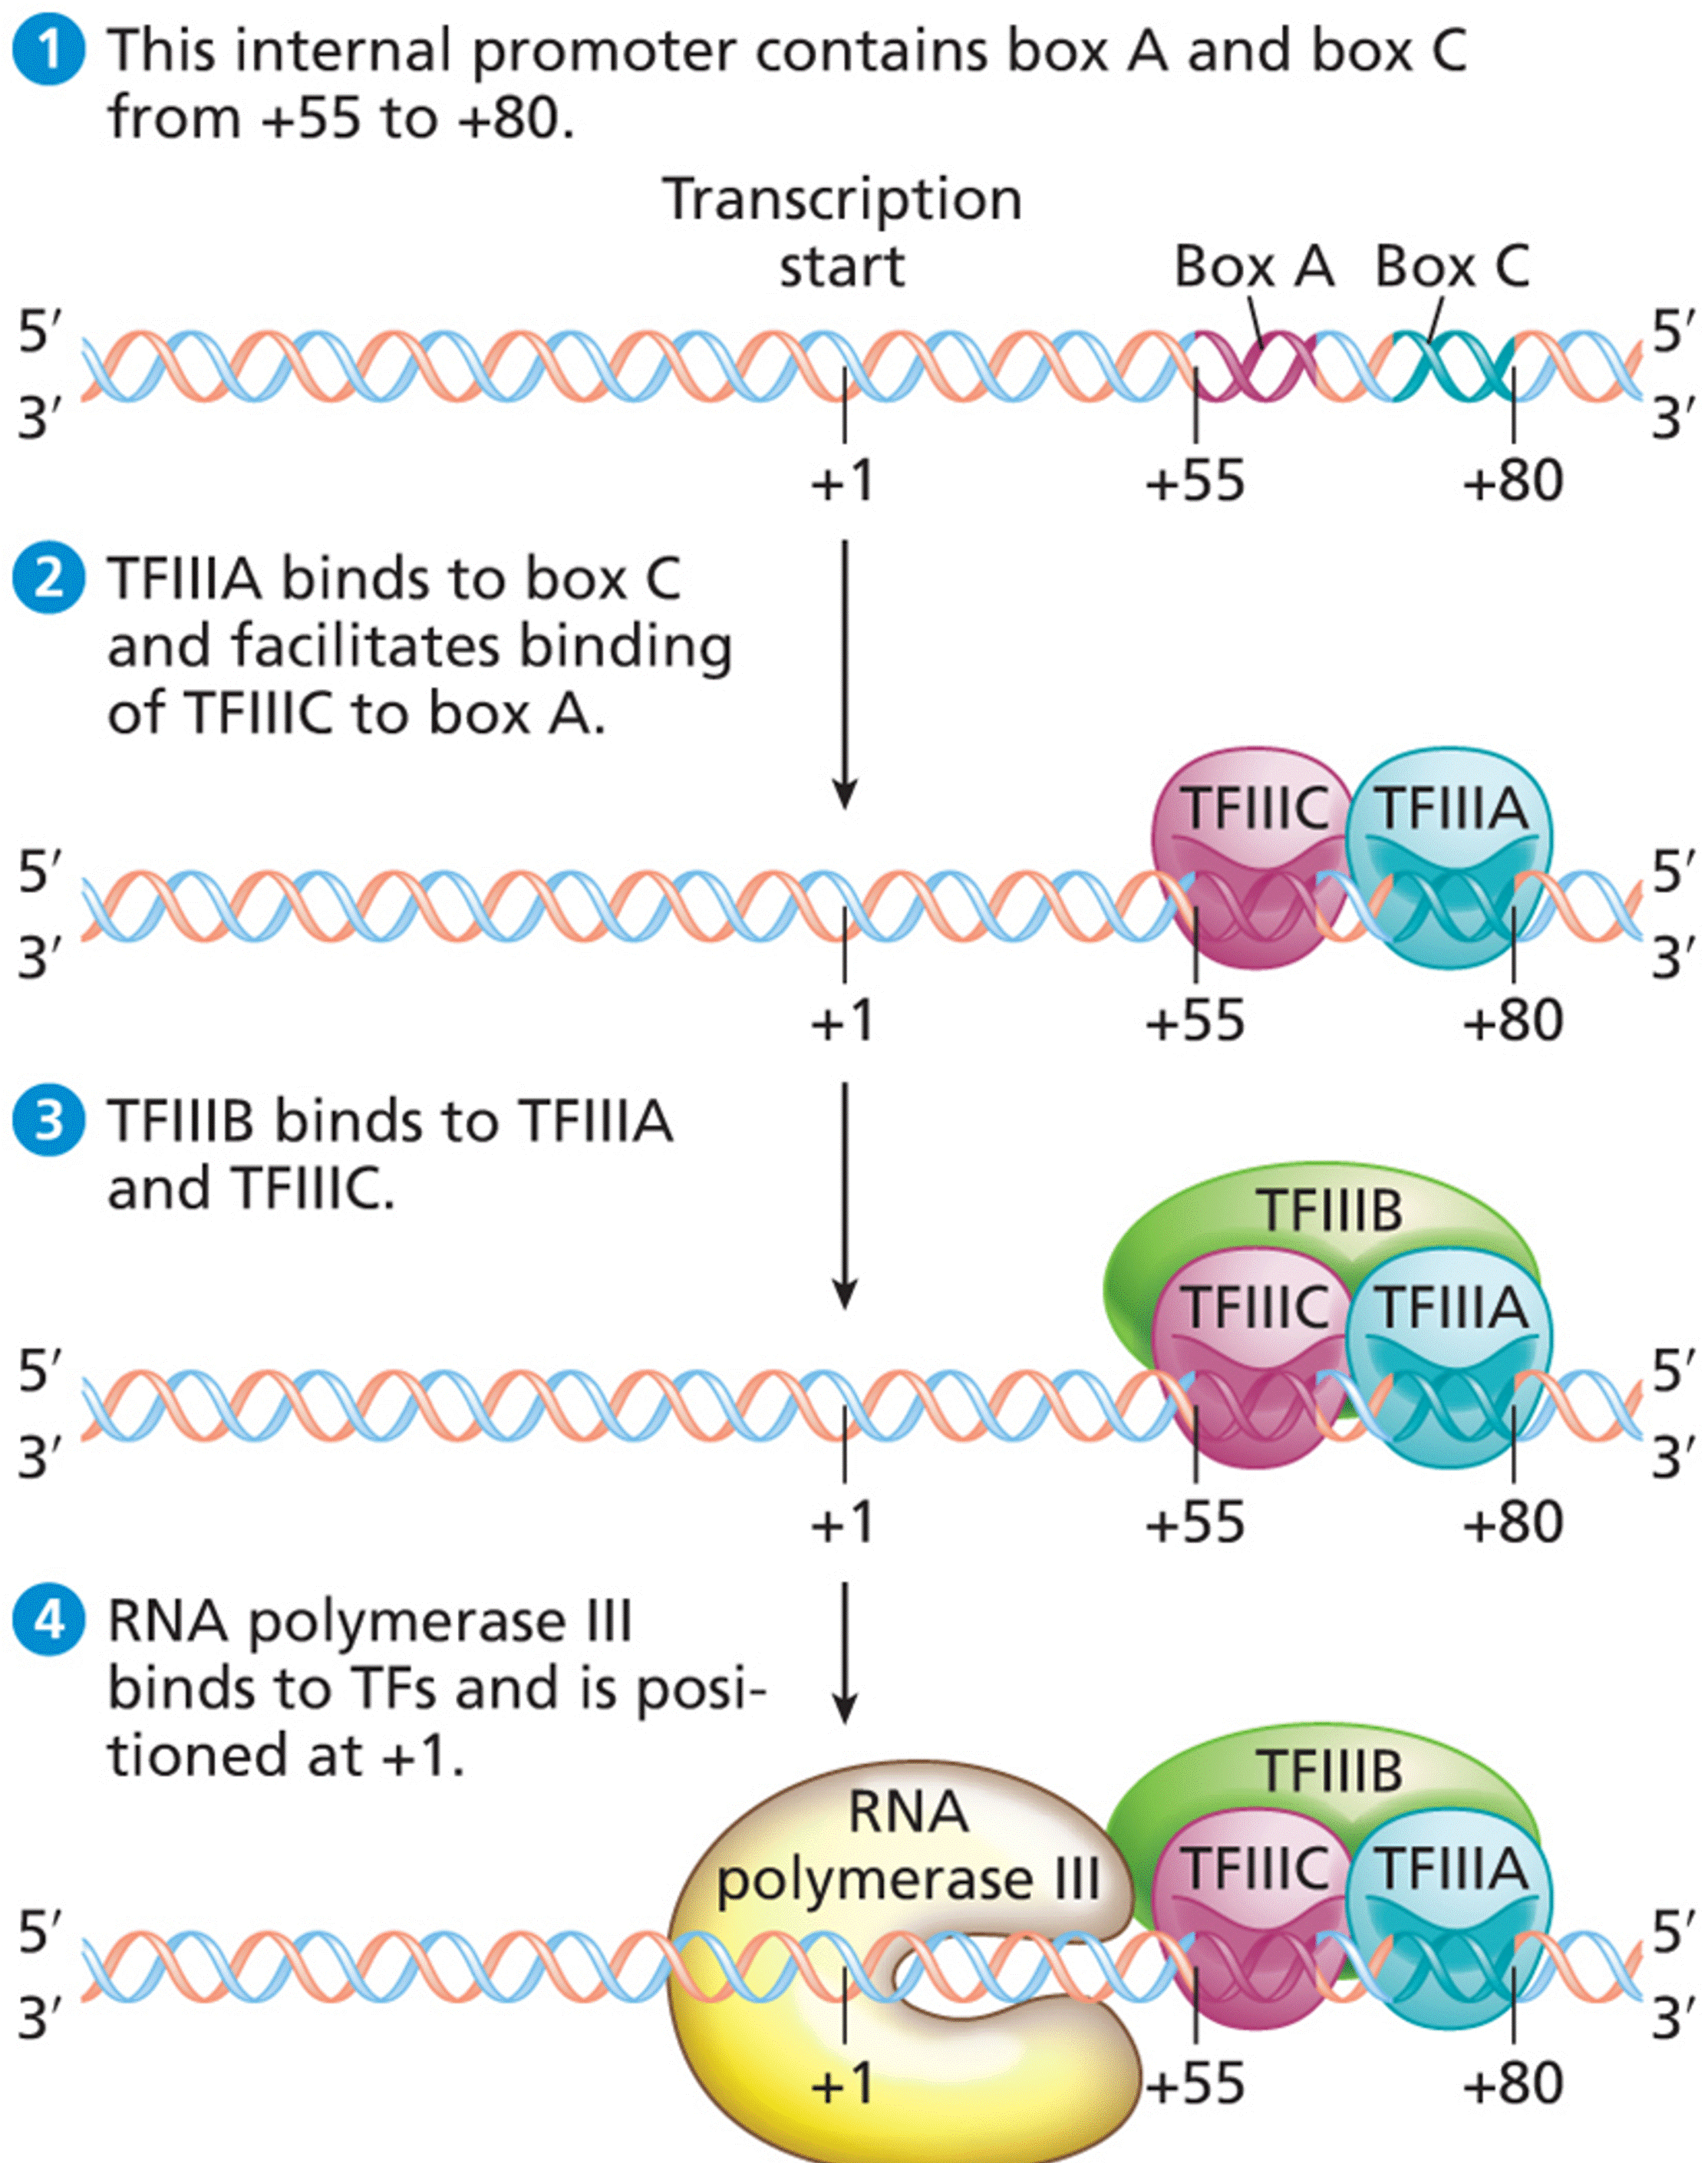 Promoter consensus sequences for transcription initiation by RNA polymerase I